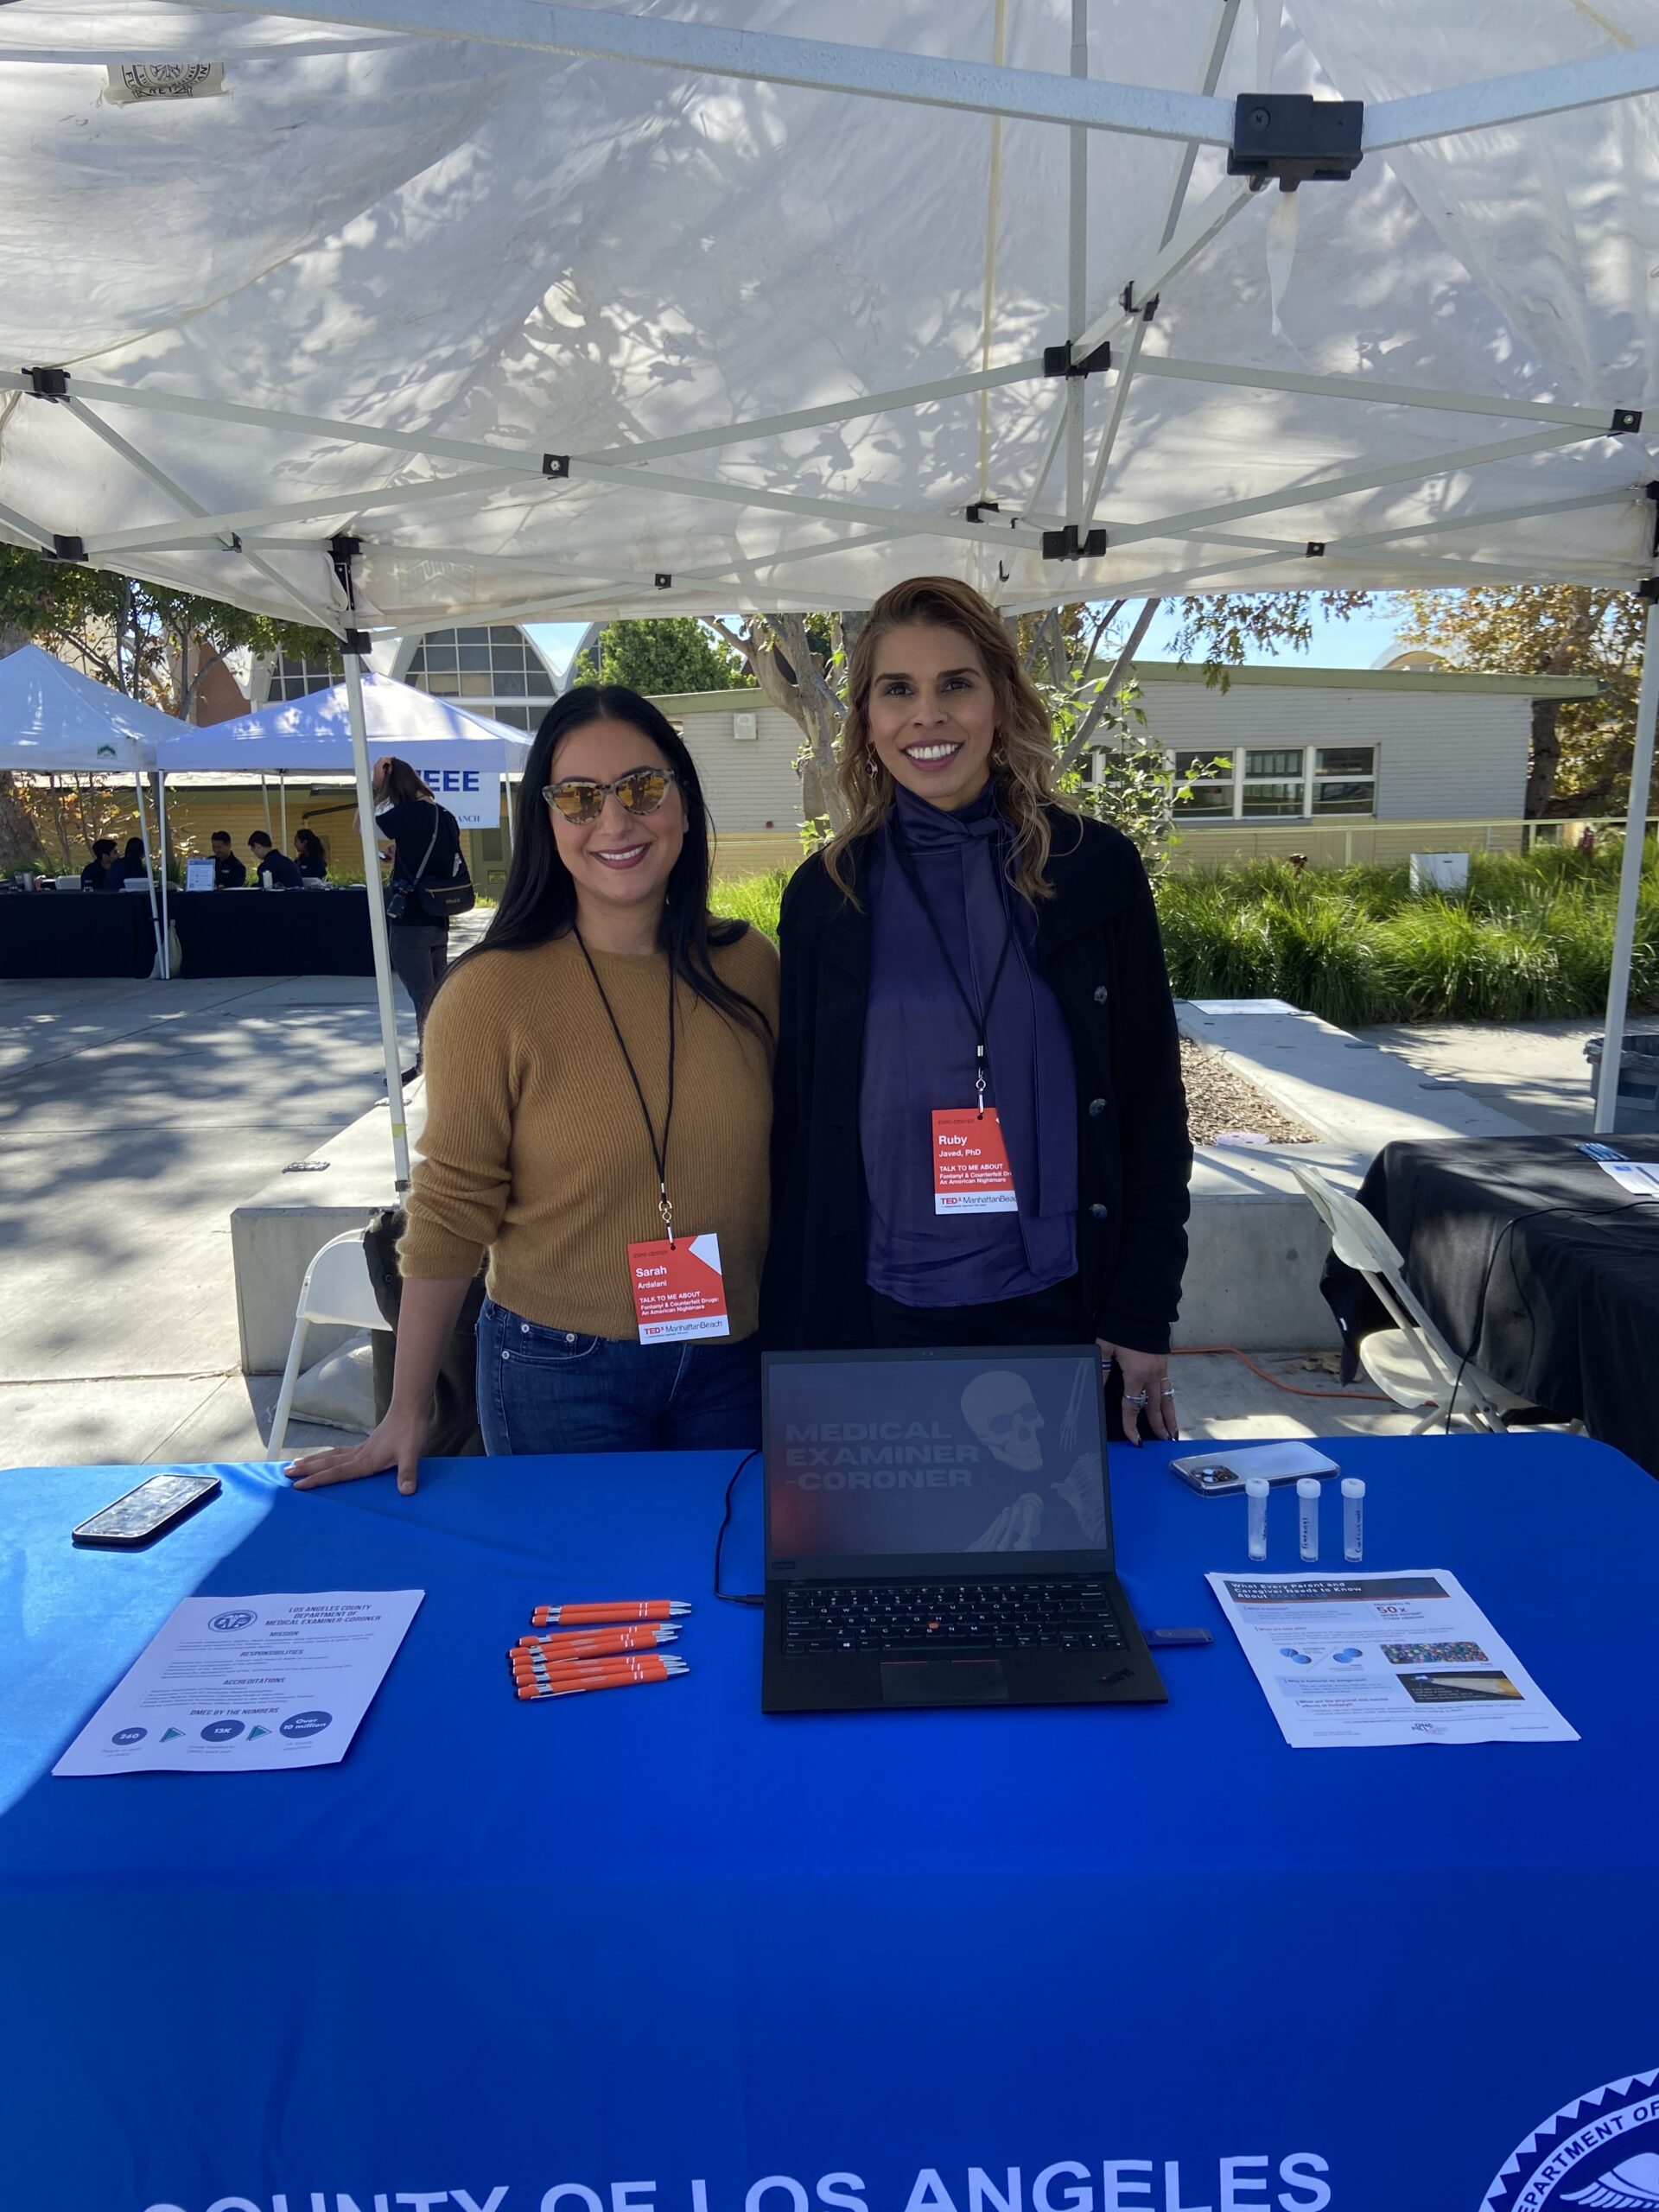 Ruby Javed with Sarah Ardelani at TEDex booth for County of Los Angeles Dept. of Medical Examiner. Tables and poster under tent.